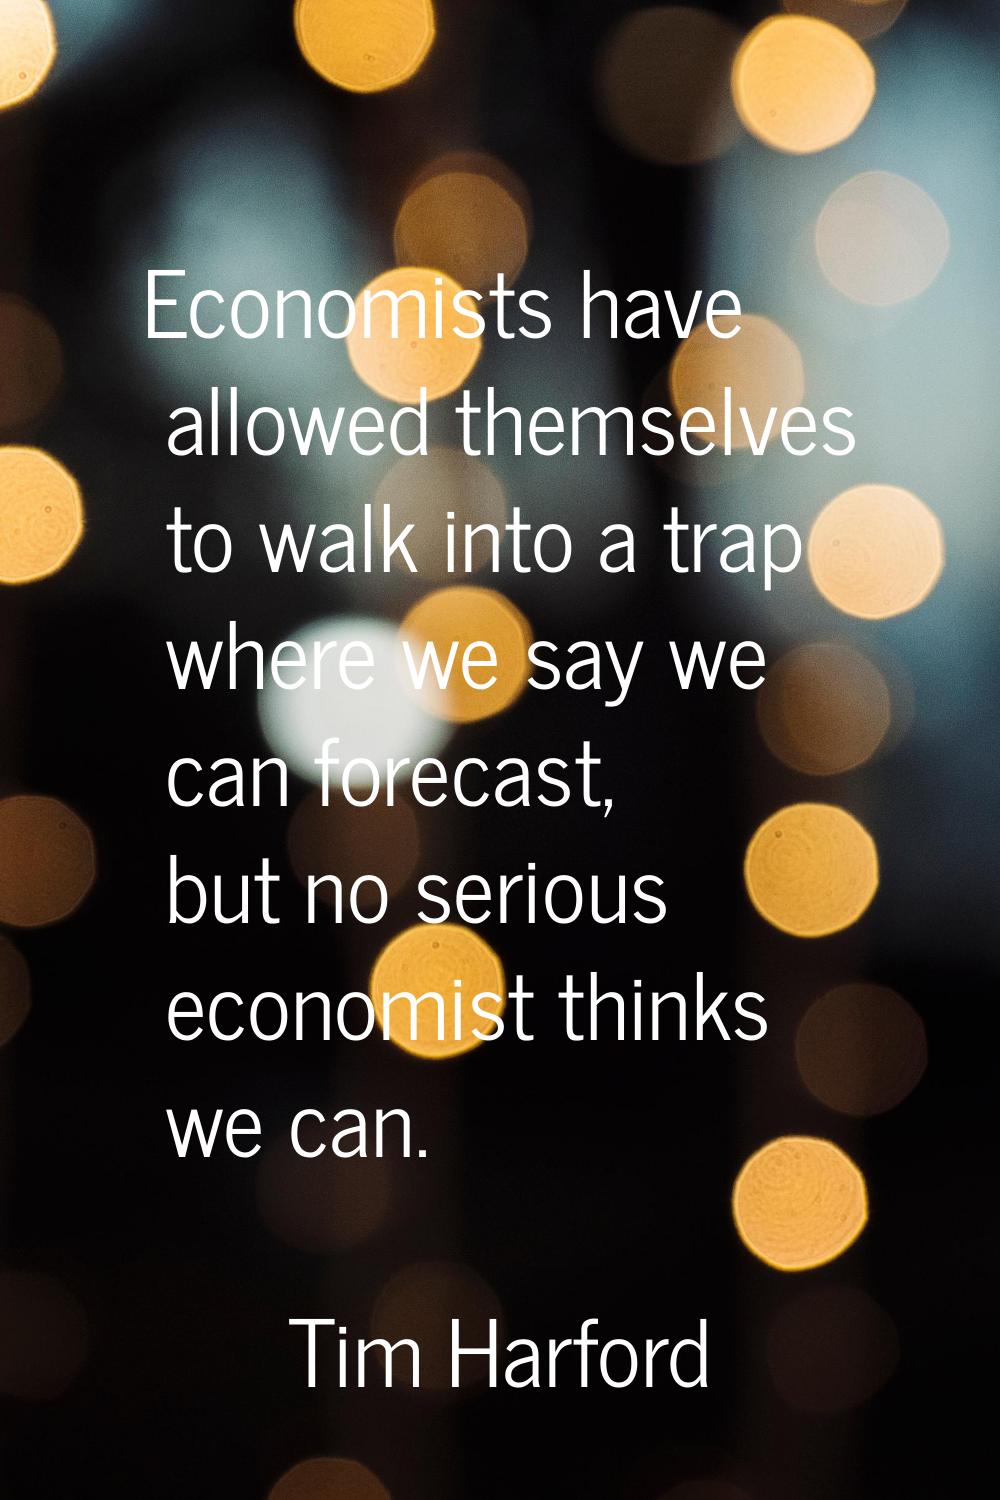 Economists have allowed themselves to walk into a trap where we say we can forecast, but no serious